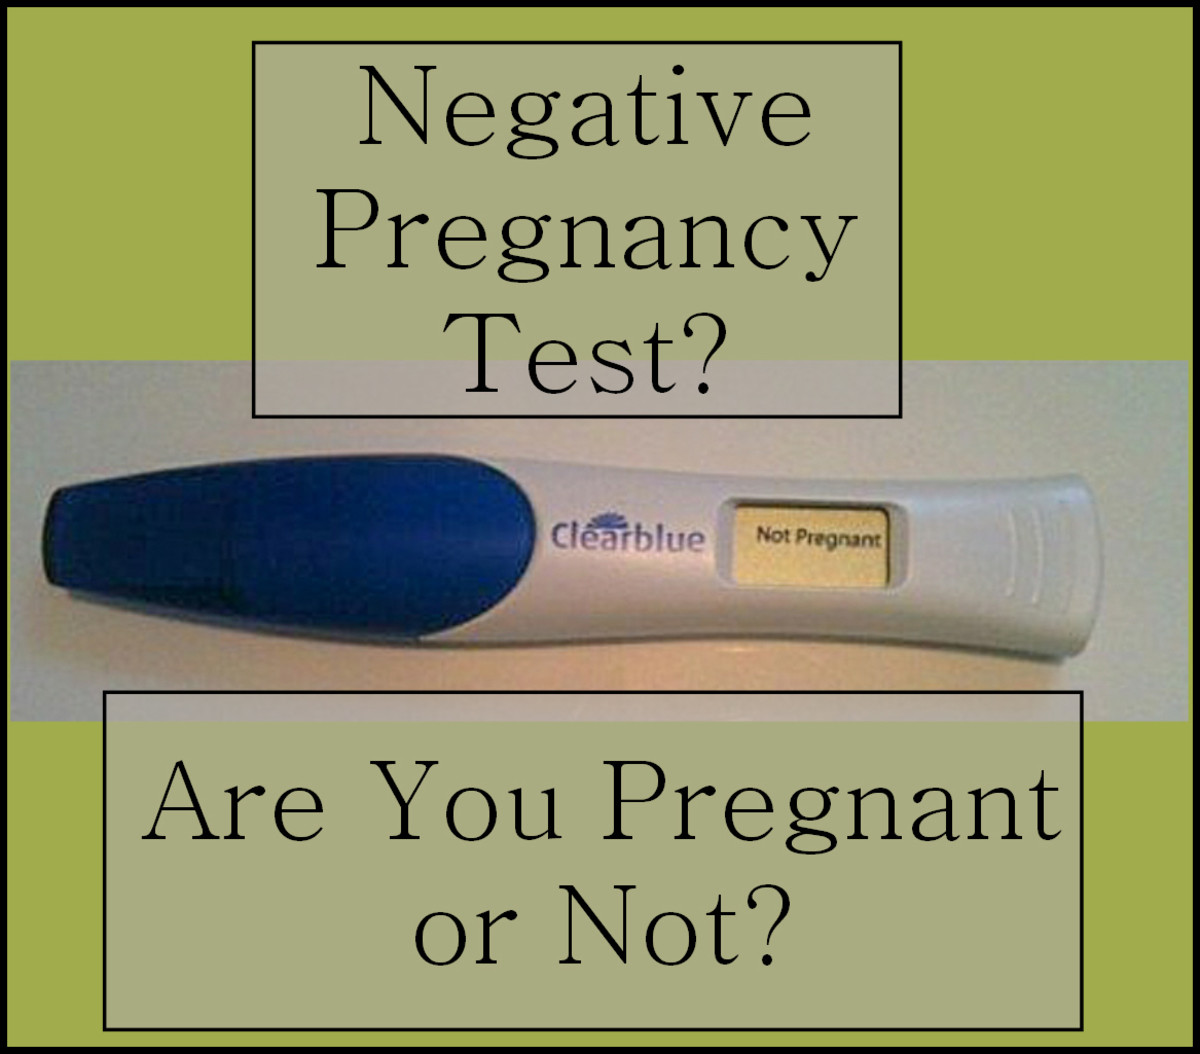 Can I Be Pregnant After a Negative Test?